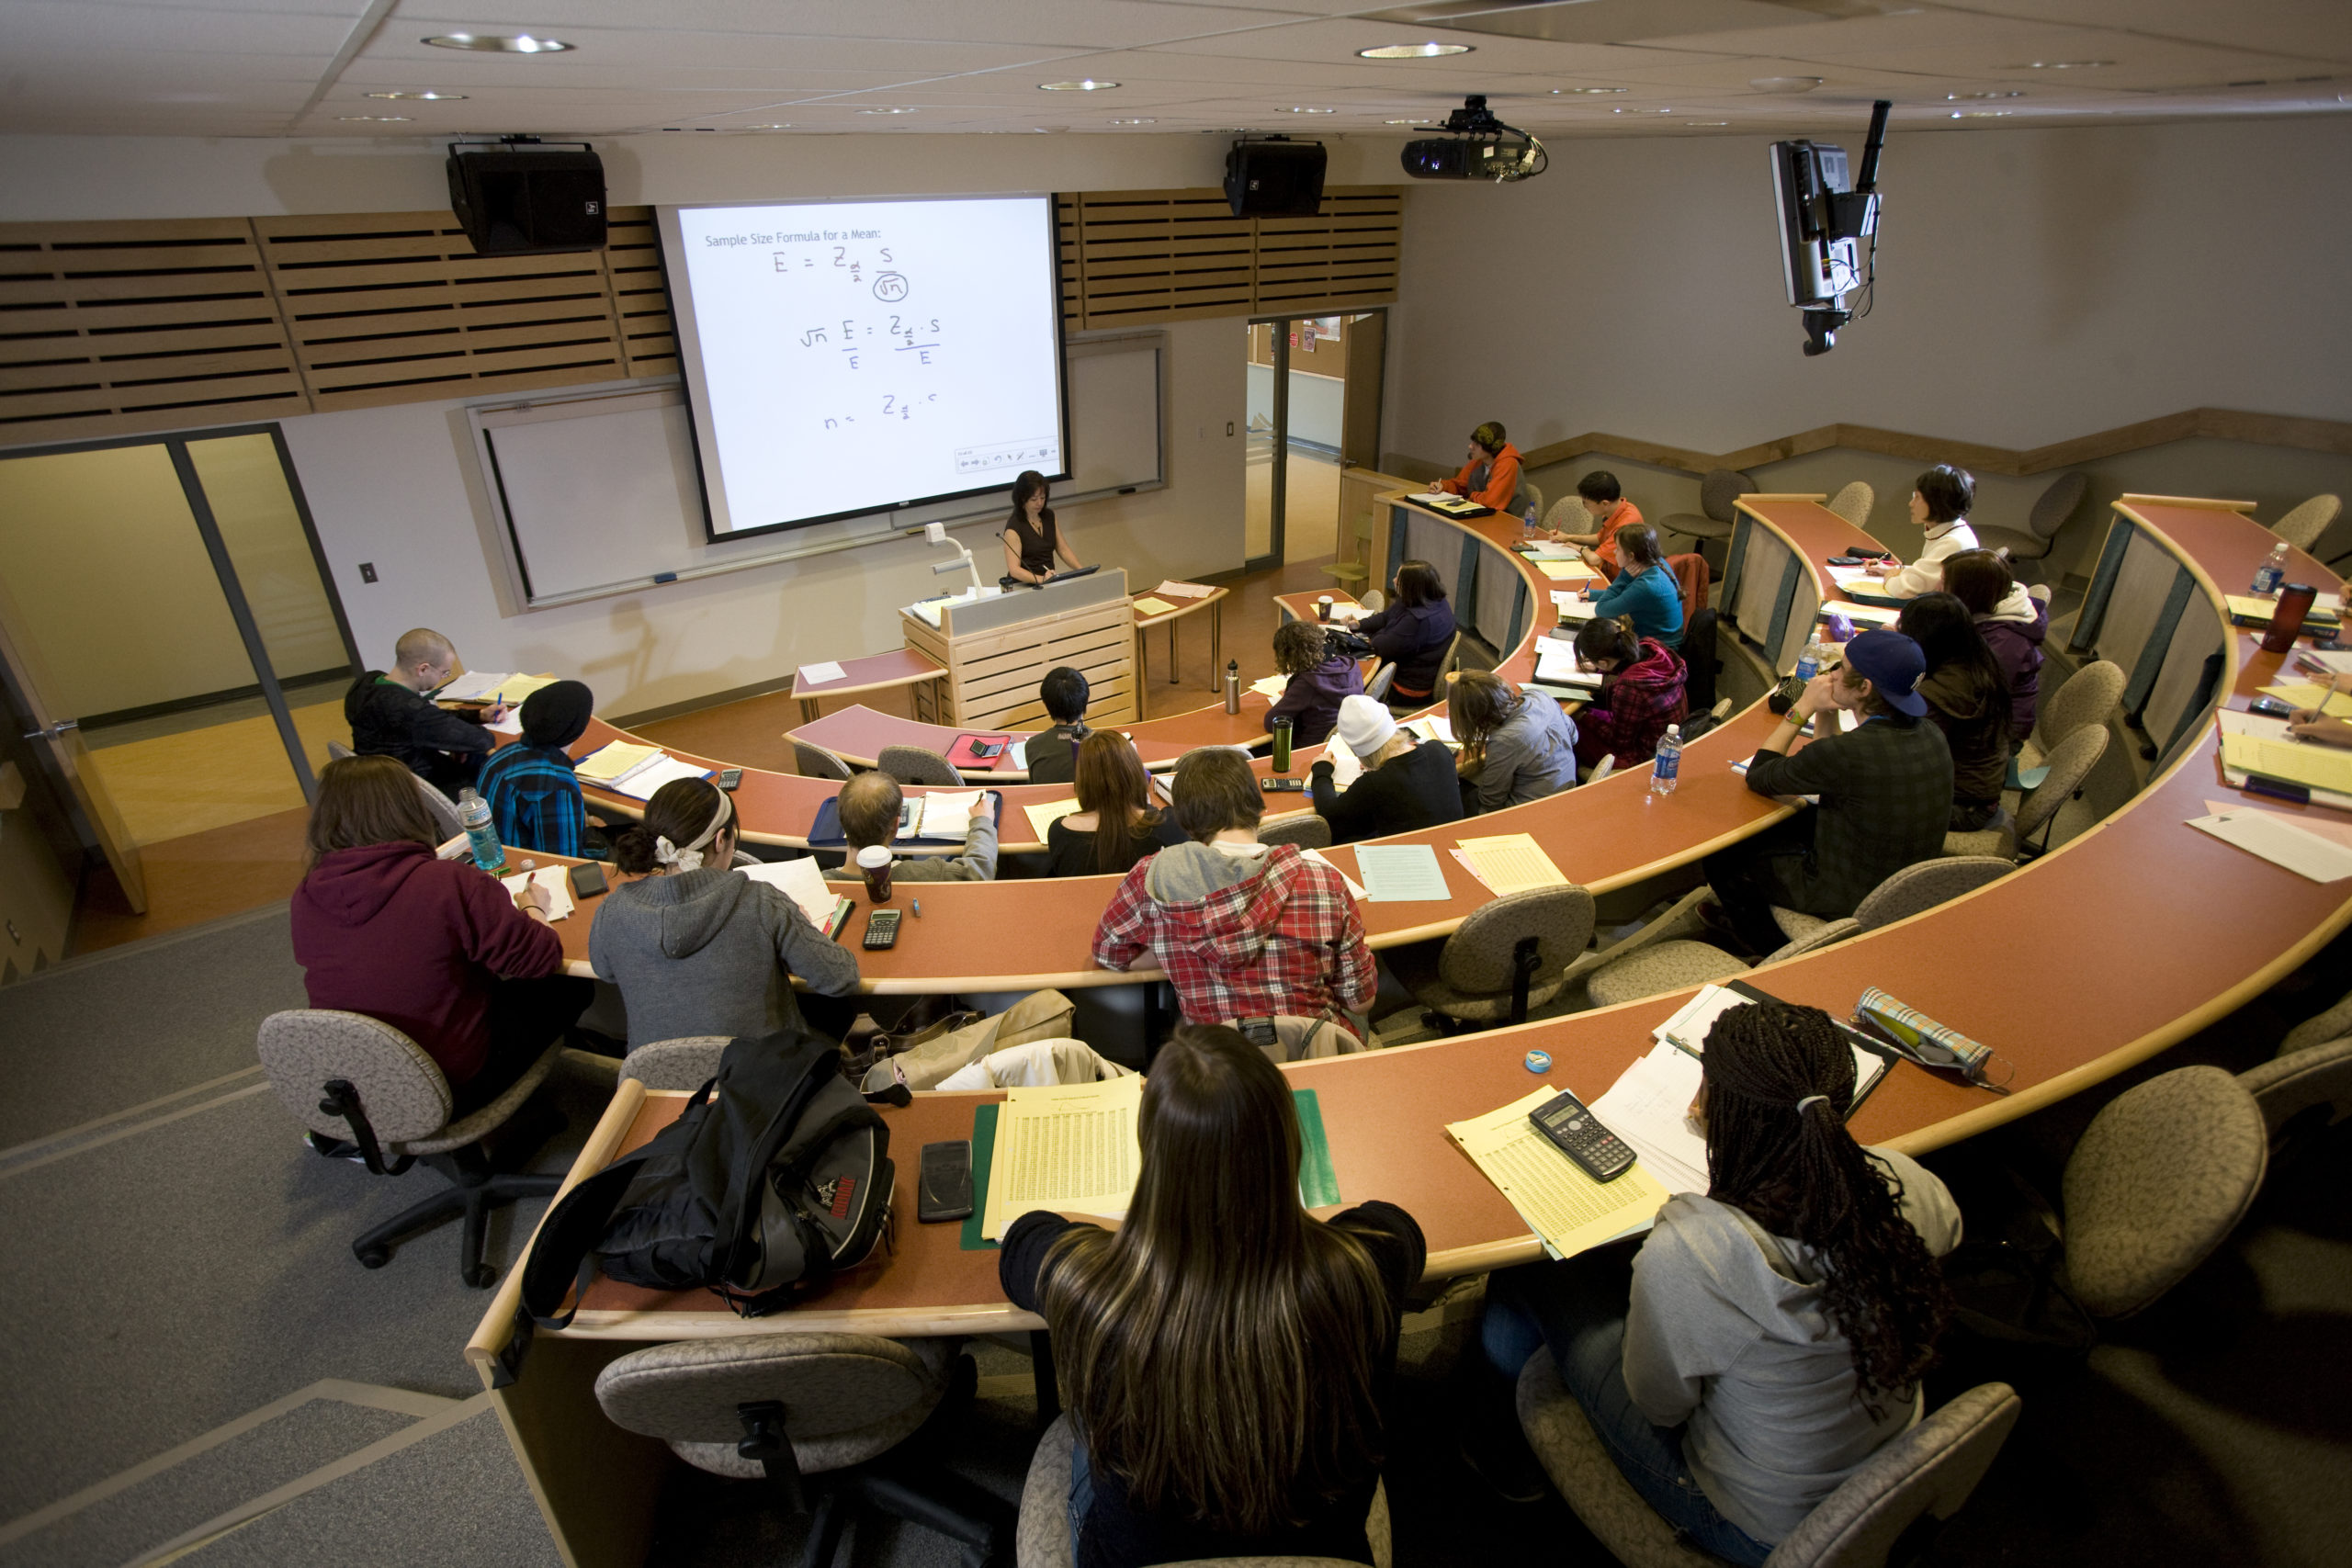 "Students in a classroom learning math at College of the Rockies."